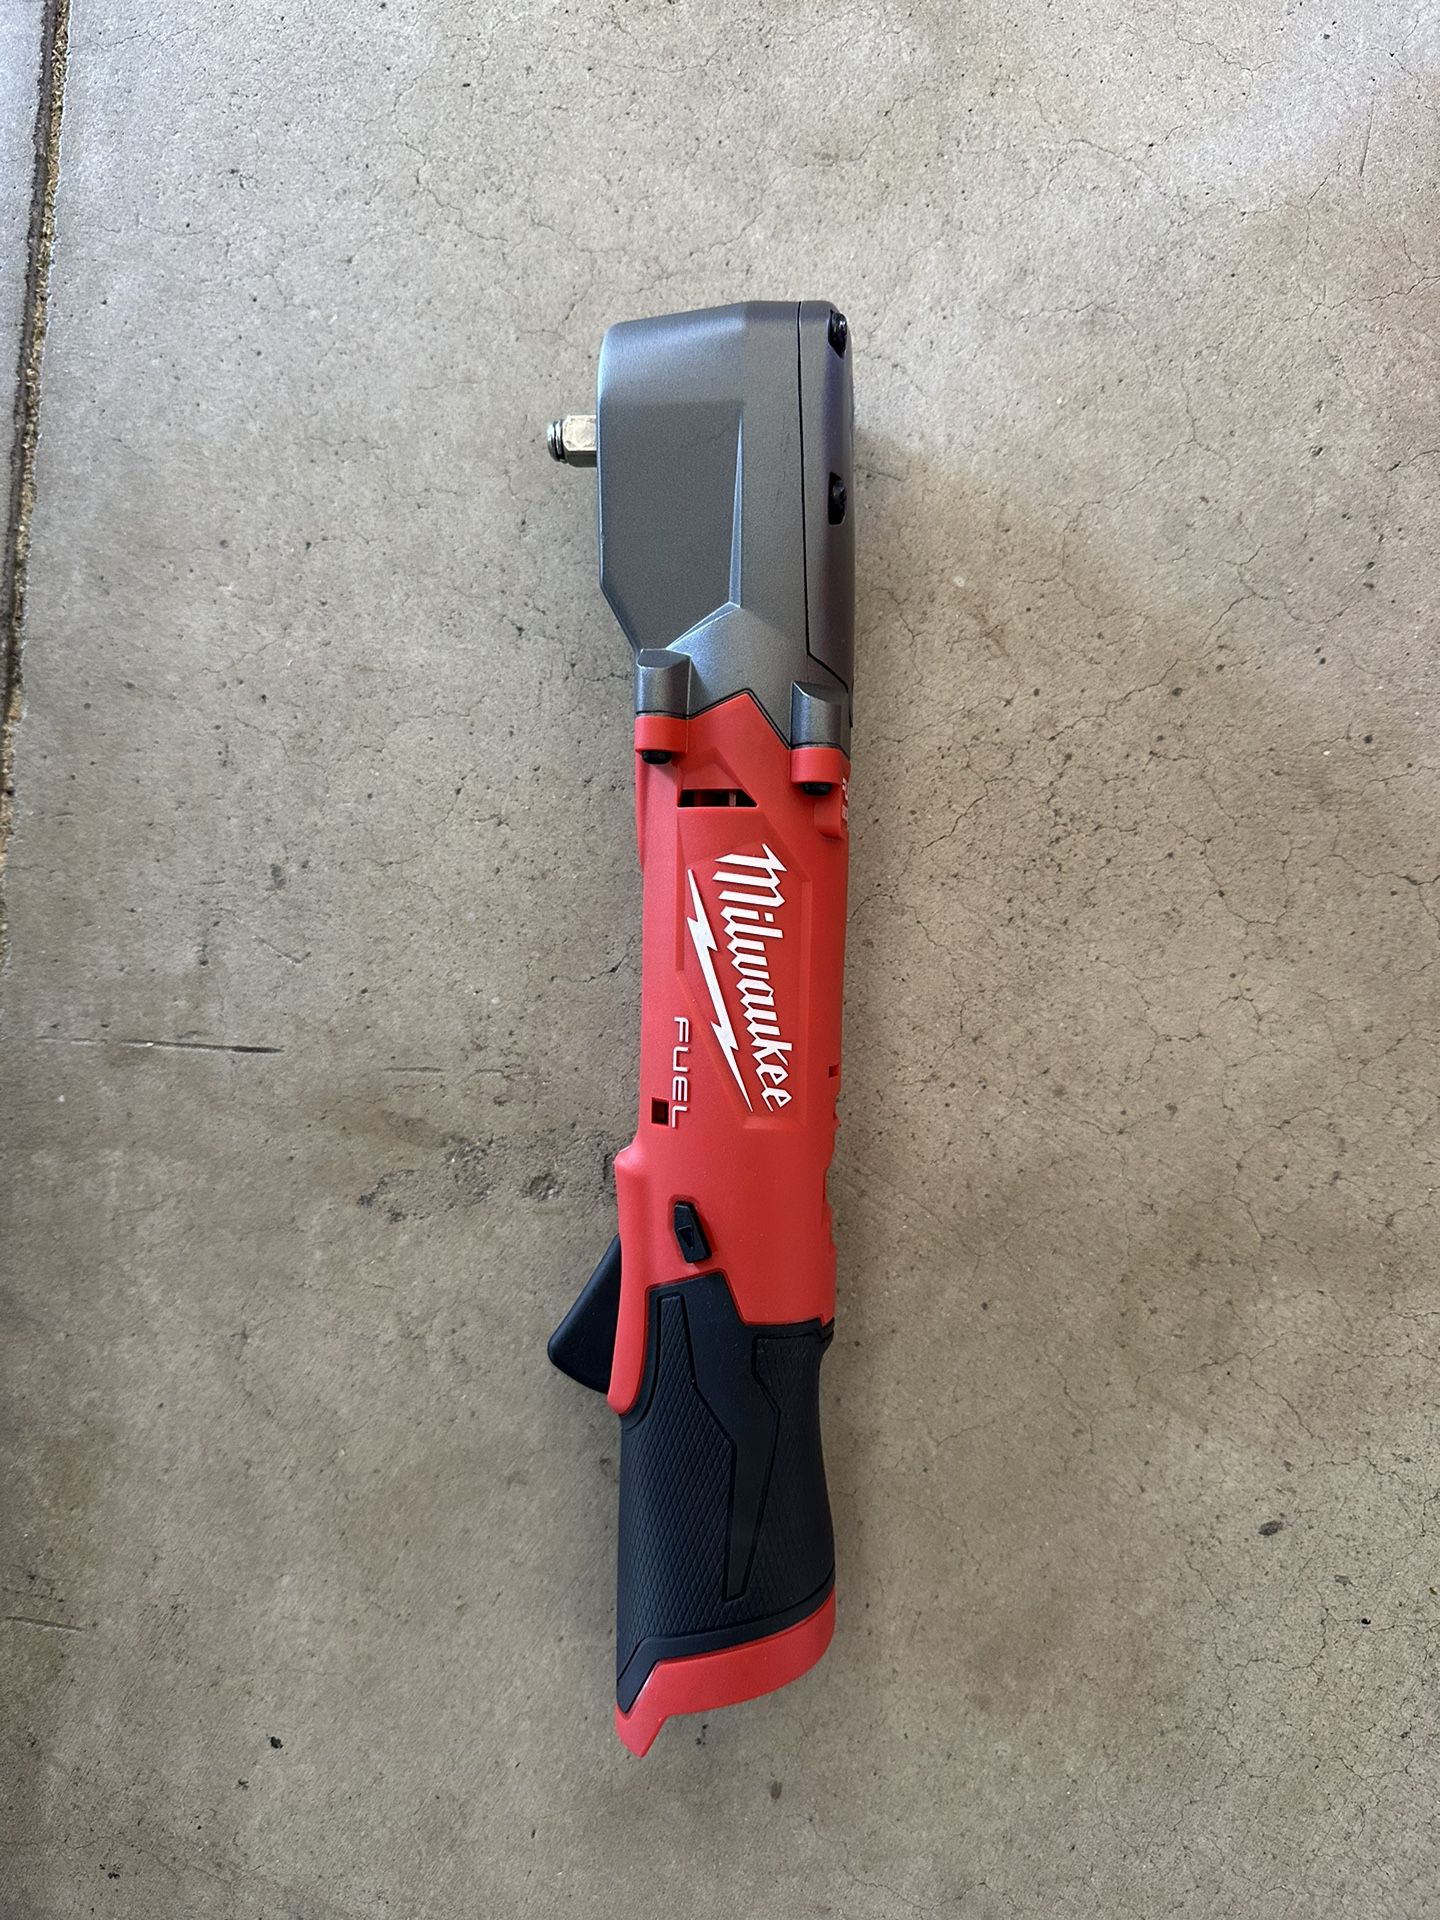 MILWAUKEE M12 FUEL 3/8 RIGHT ANGLE IMPACT WRENCH